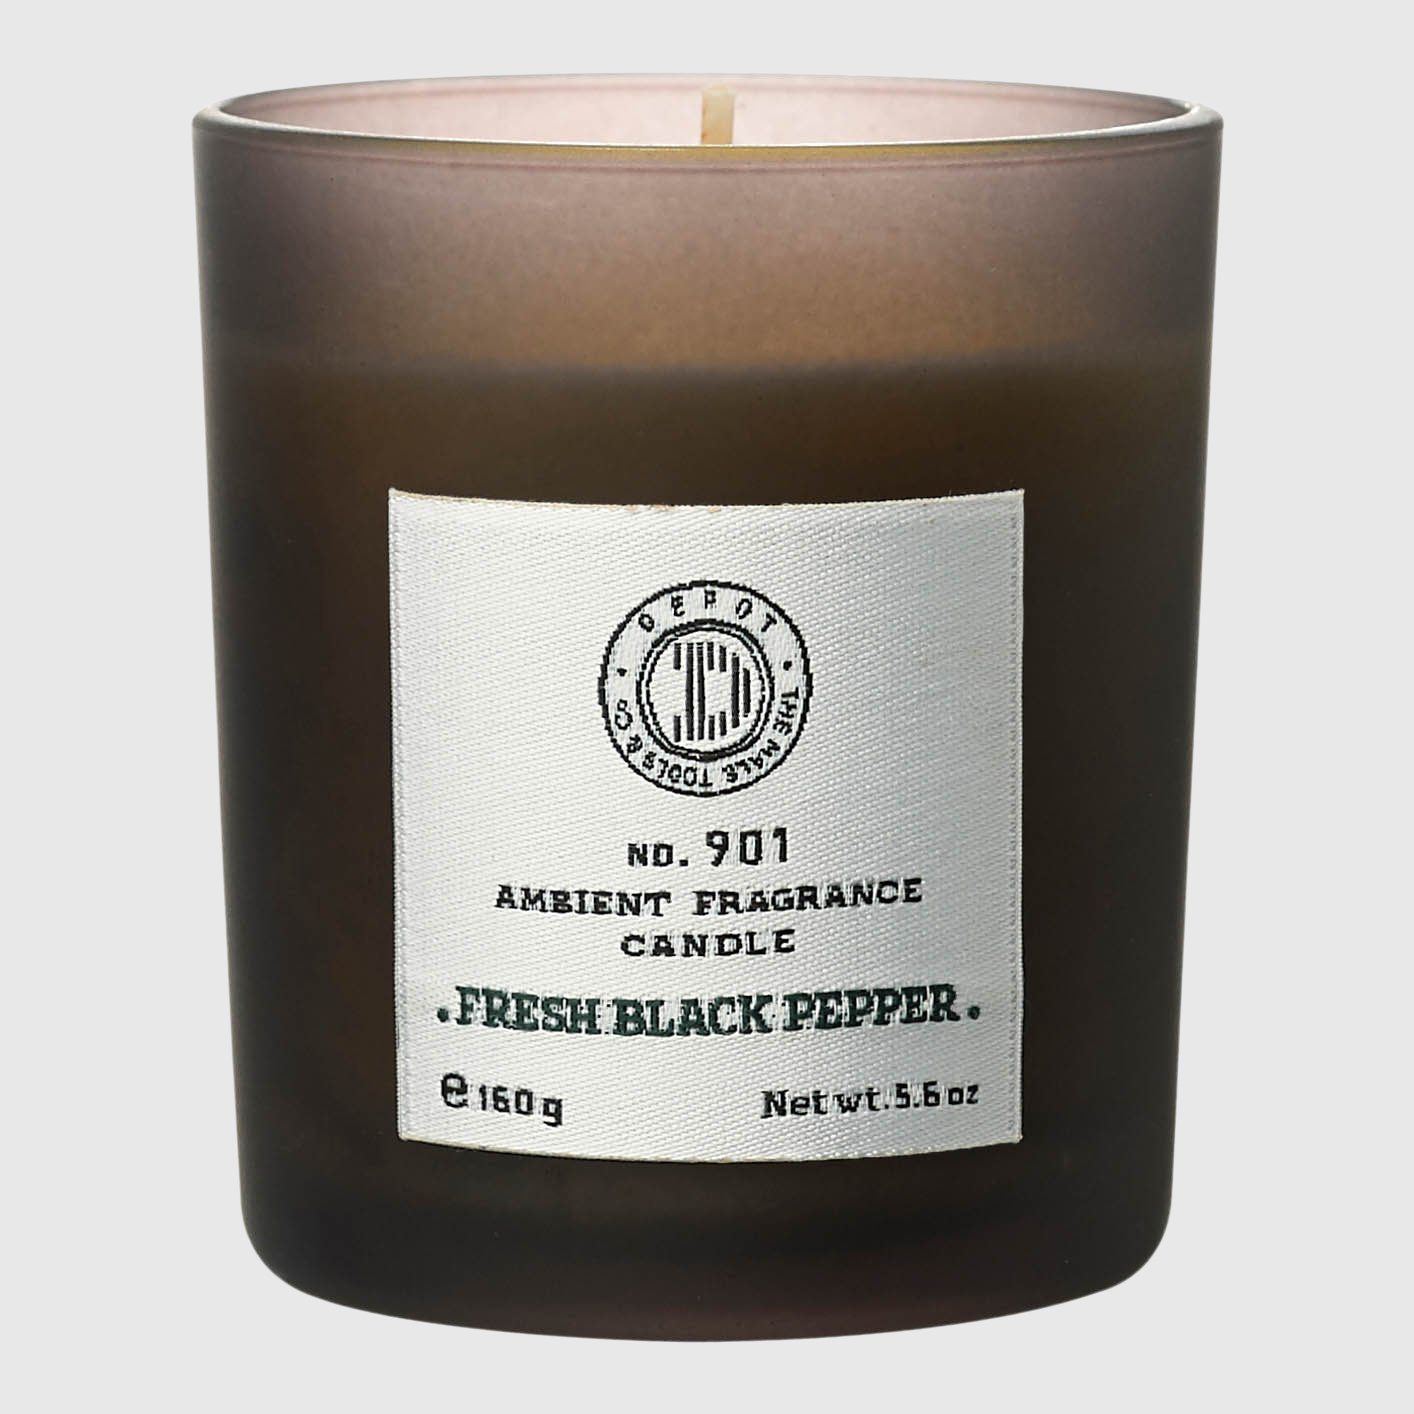 Depot No. 901 Ambient Fragrance Candle Candle Depot 